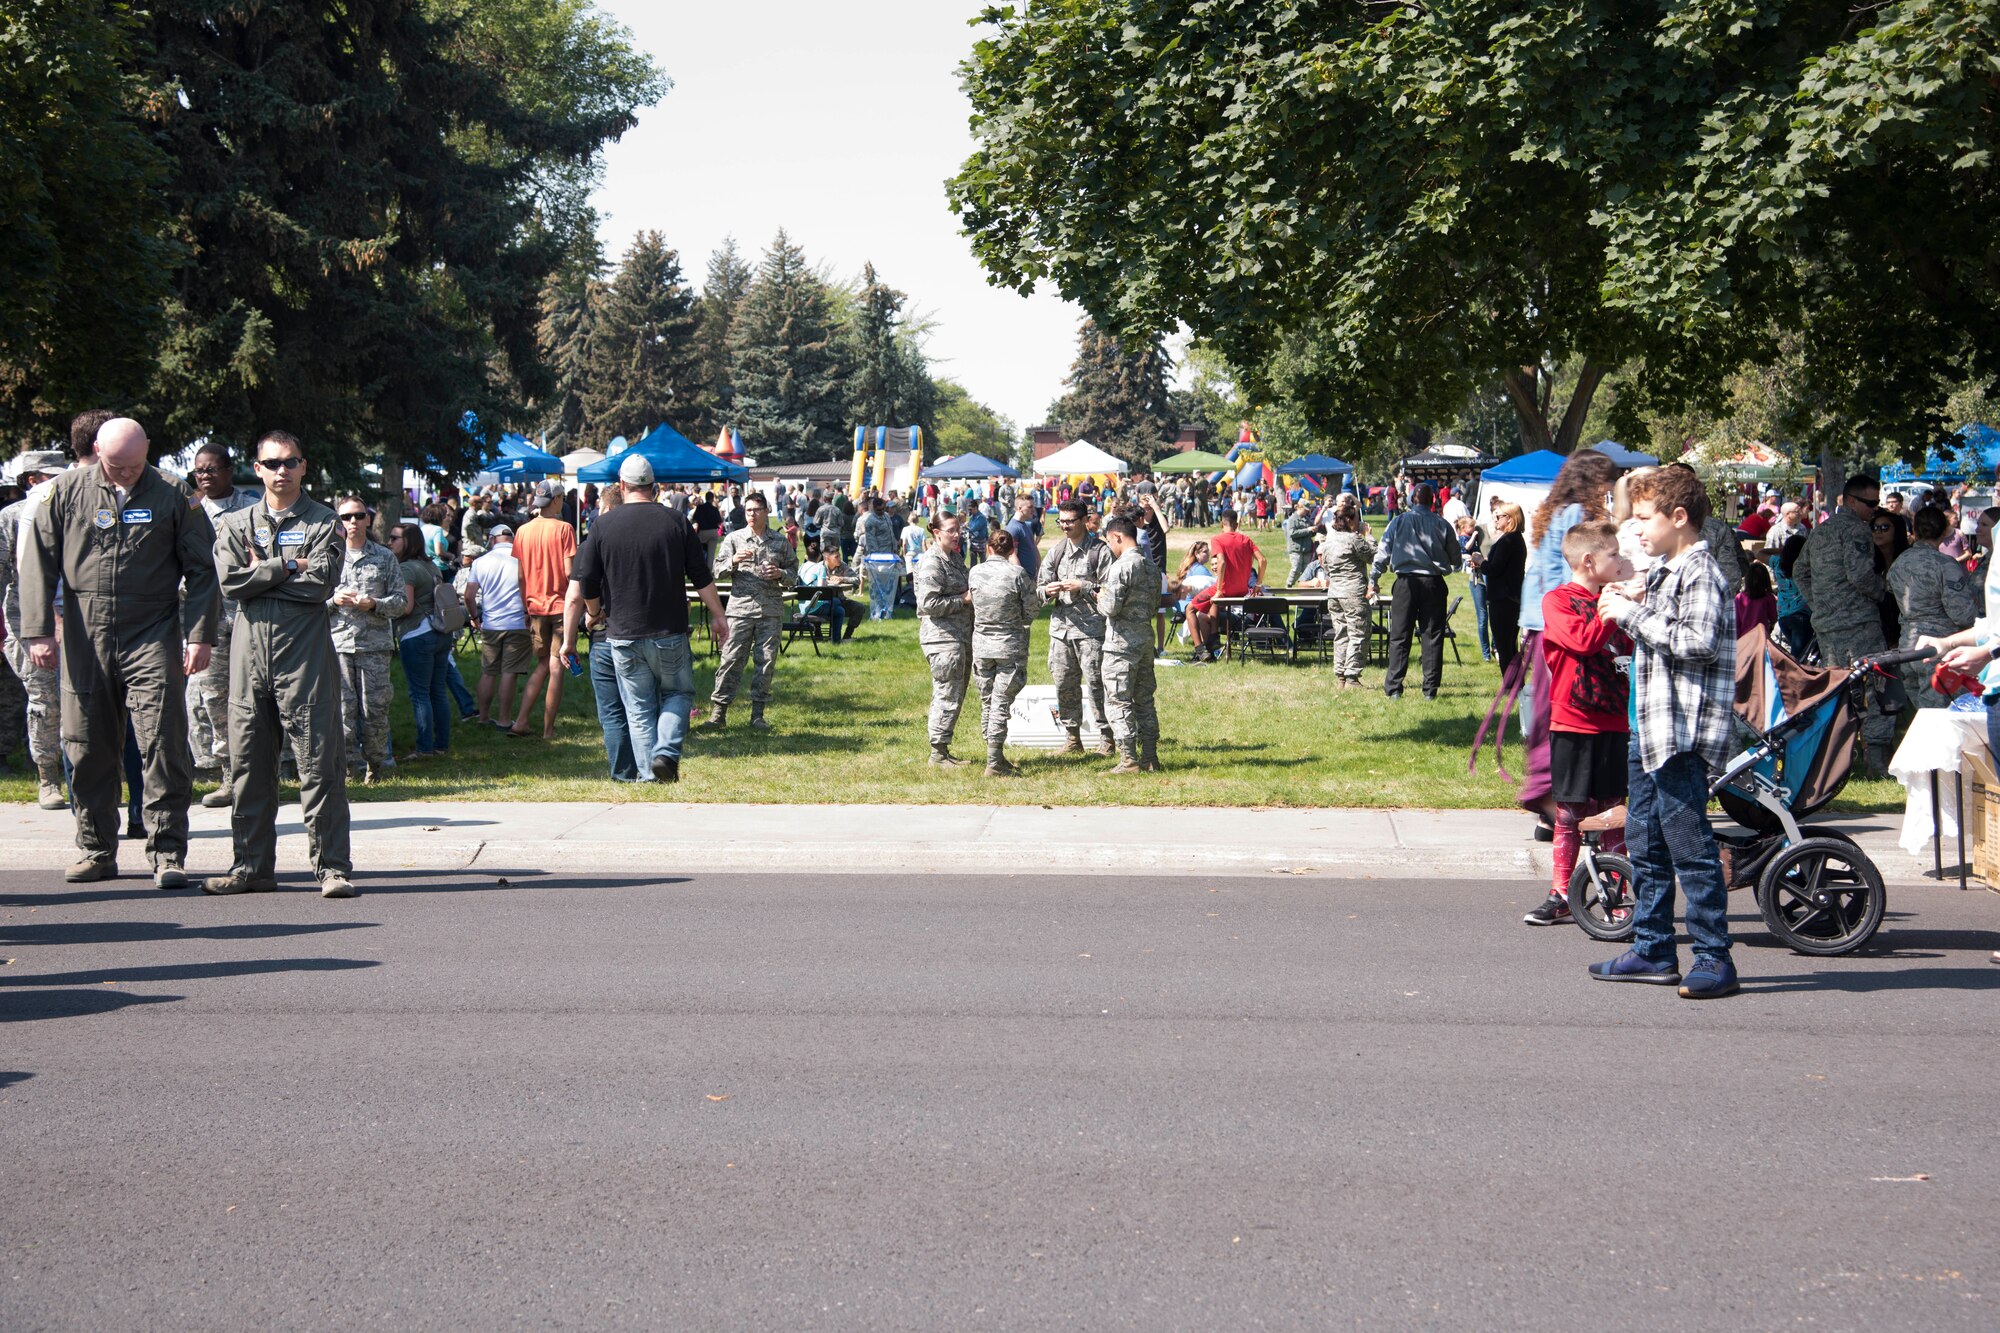 Airmen and their families enjoy the free attractions at the 2018 Fairchild Food Truck Festival, Aug. 28, 2018, at Fairchild Air Force Base, Washington. Hundreds of base residents swarmed the fields near Heritage Park for the festival where they enjoyed free food, rides and could win prizes for participation with visiting vendors. (U.S. Air Force photo/ Senior Airman Ryan Lackey)